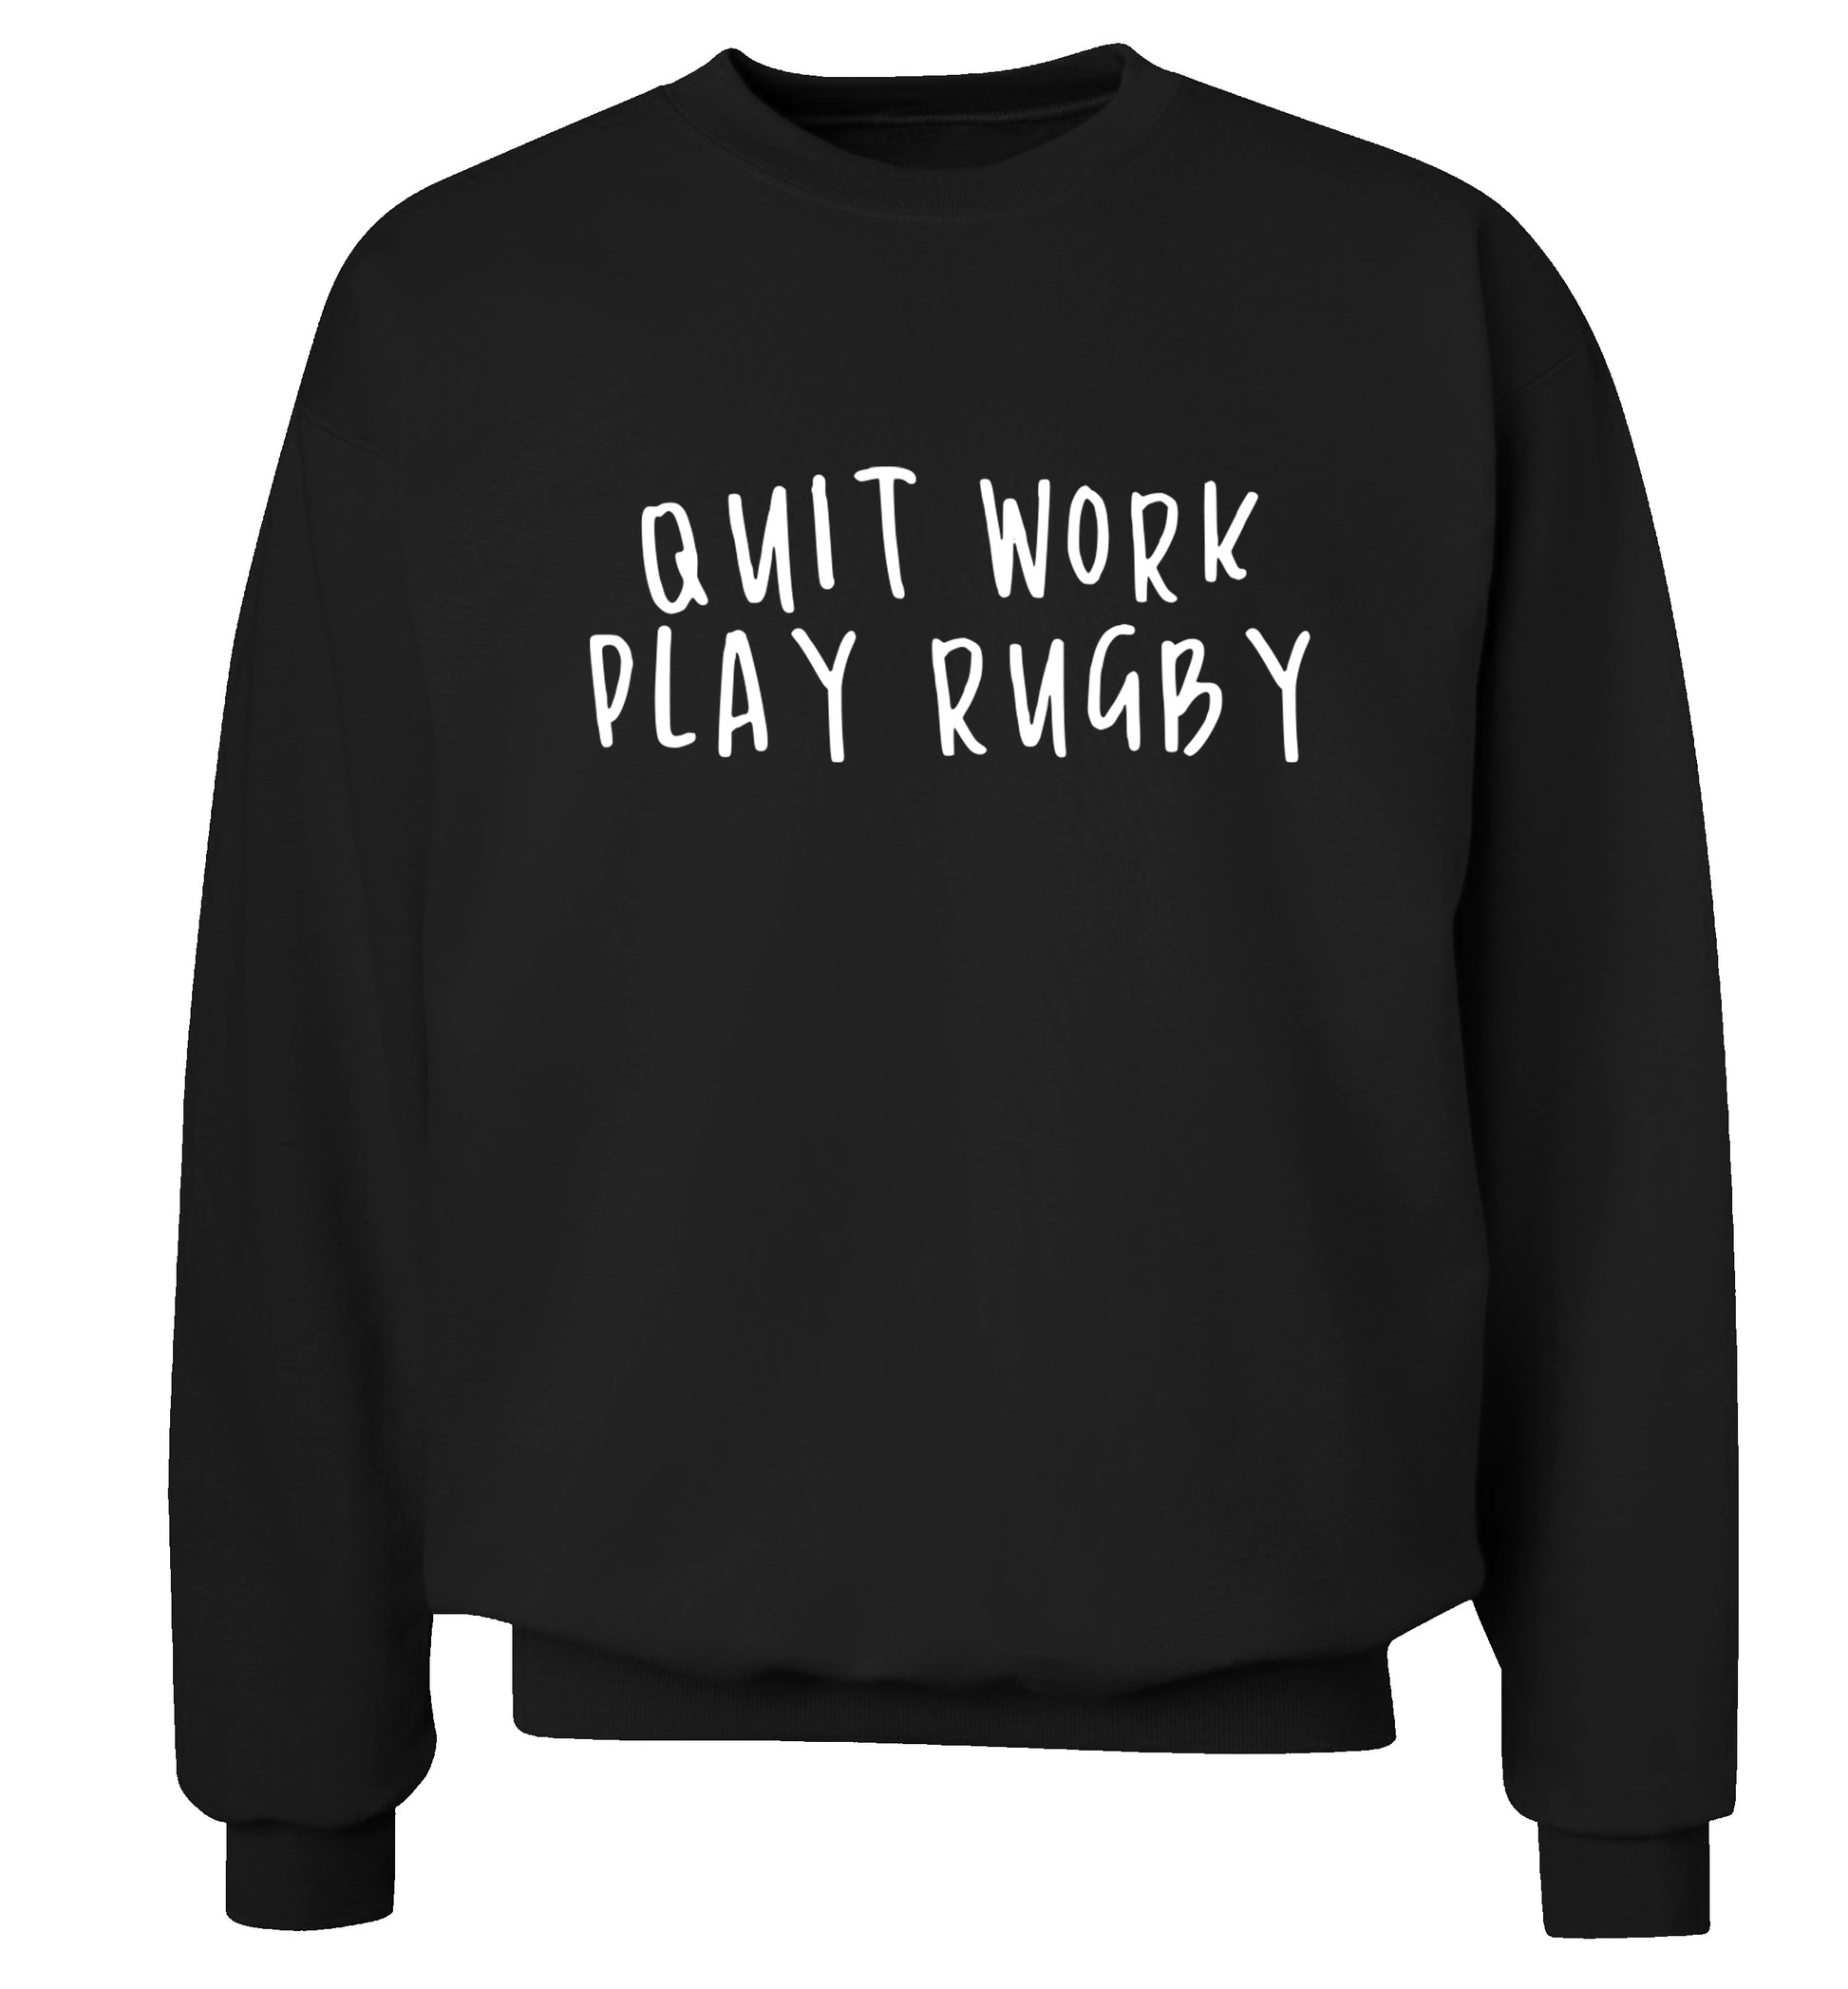 Quit work play rugby Adult's unisex black Sweater 2XL